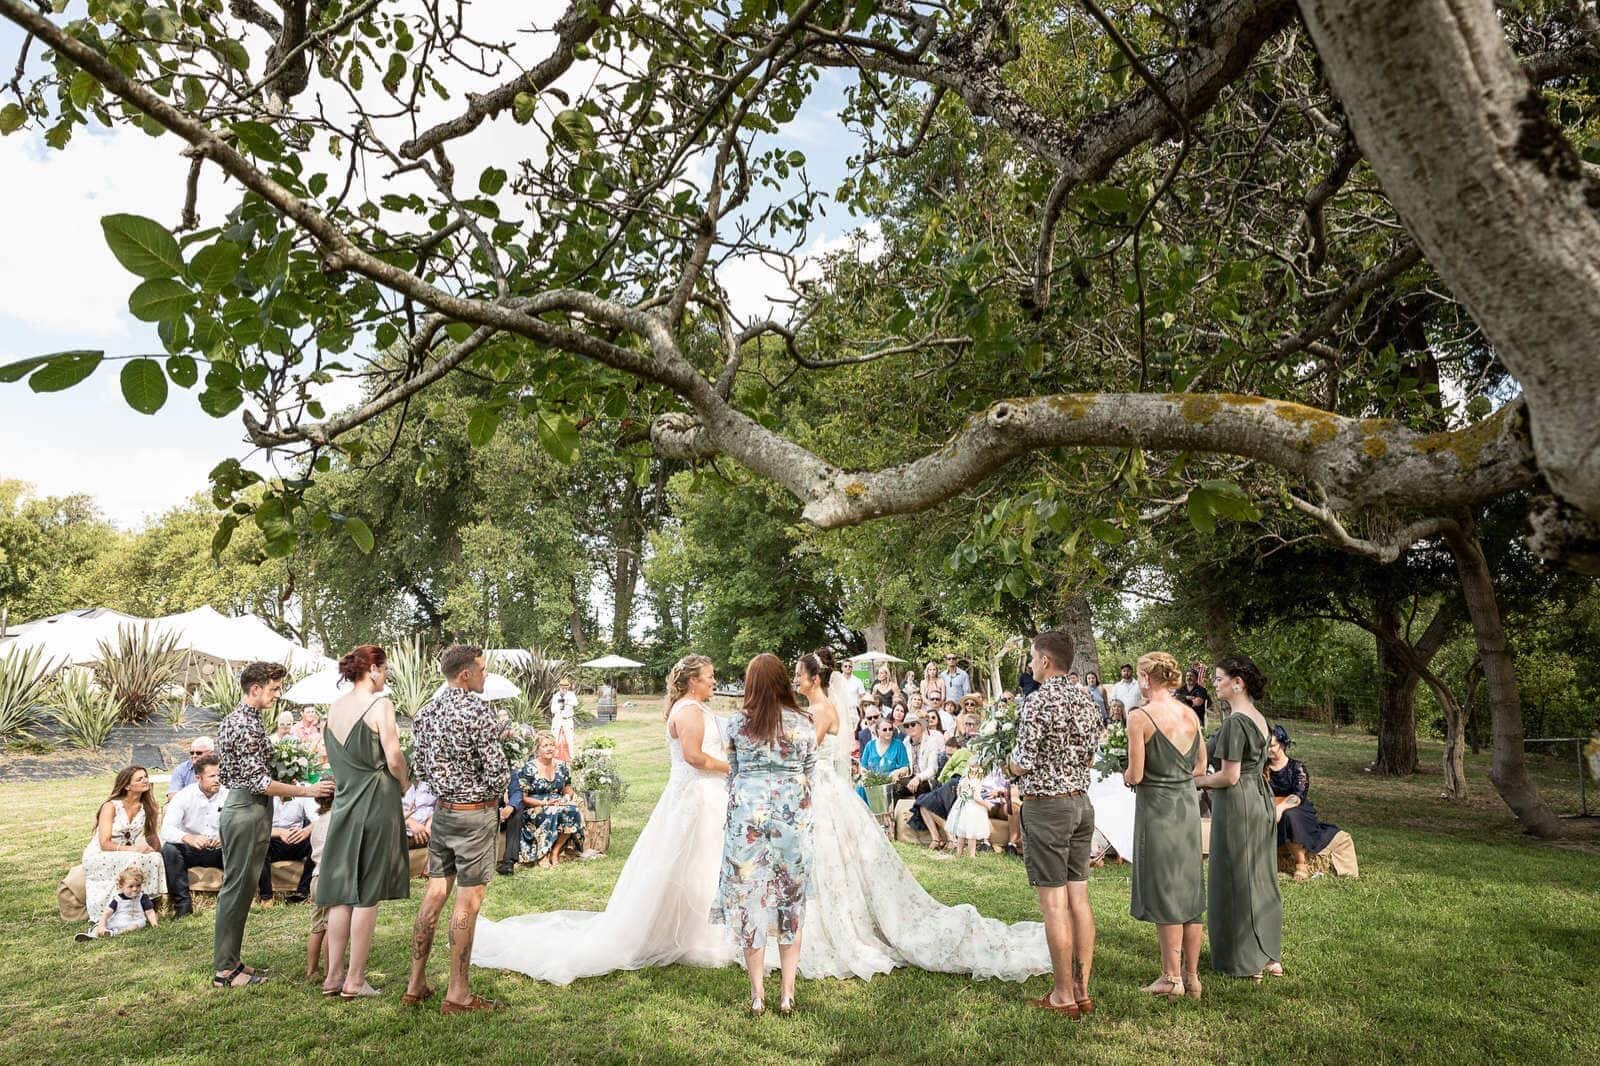  Chloe and Libby take their vows amongst their nearest and dearest in a stunning backyard with that amazing tree as the perfect backdrop!  Images by Mel Waite Photography  